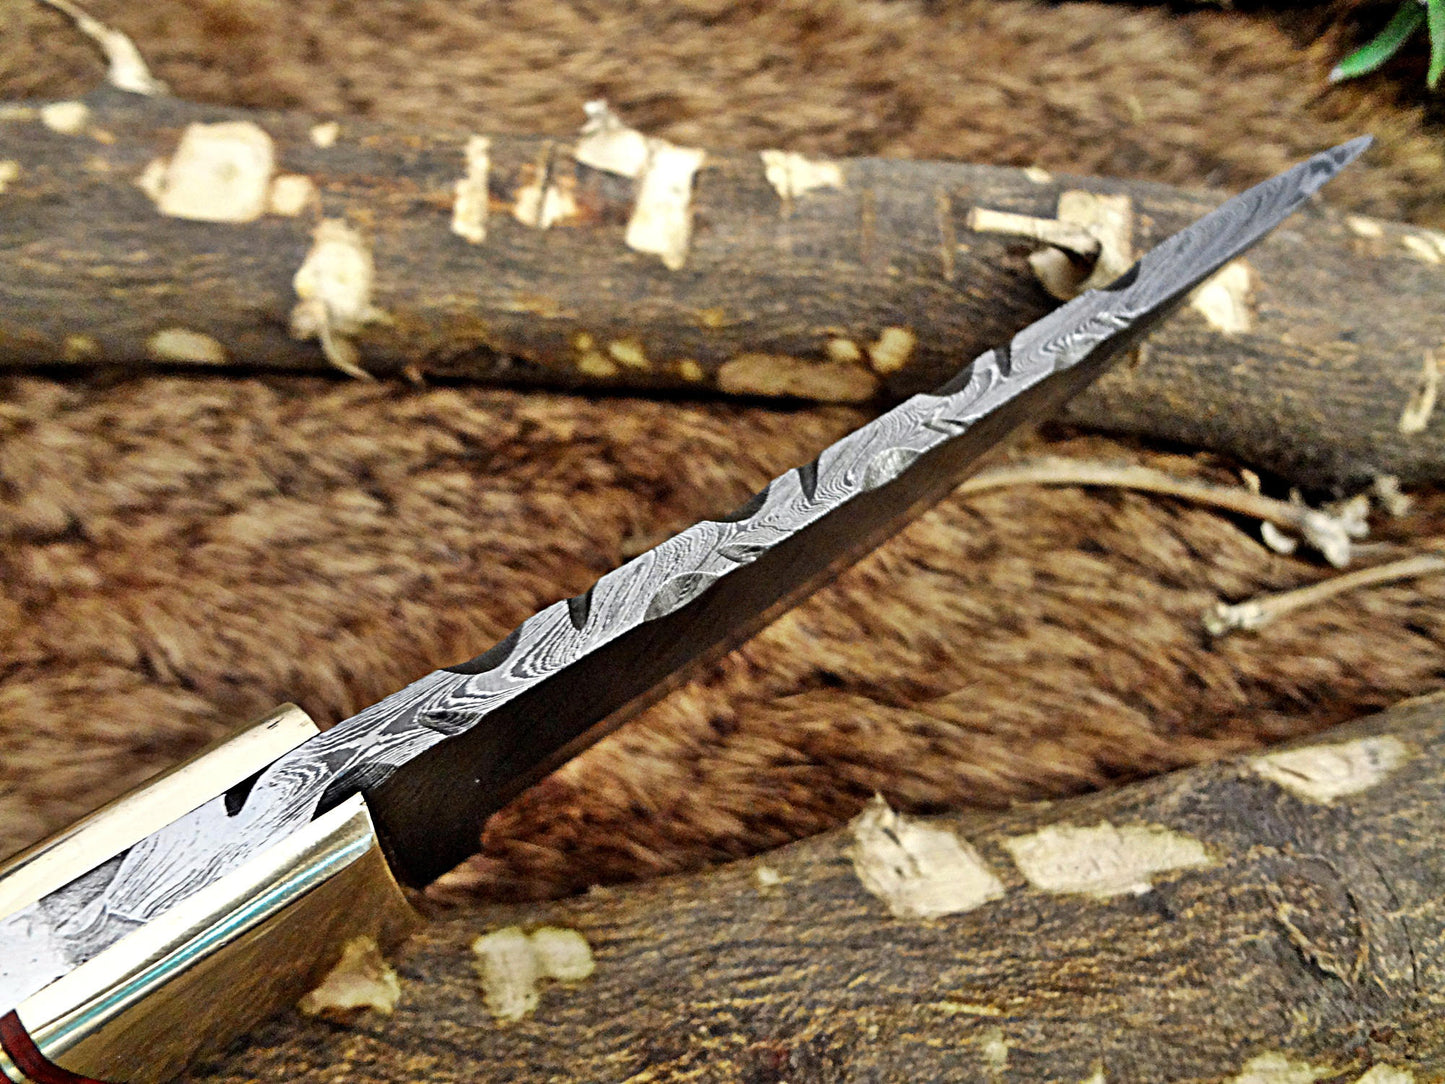 9.5" Damascus steel full tang blade skinning Knife, Available in 2 wood scales with Brass bolster, includes Cow hide Leather sheath